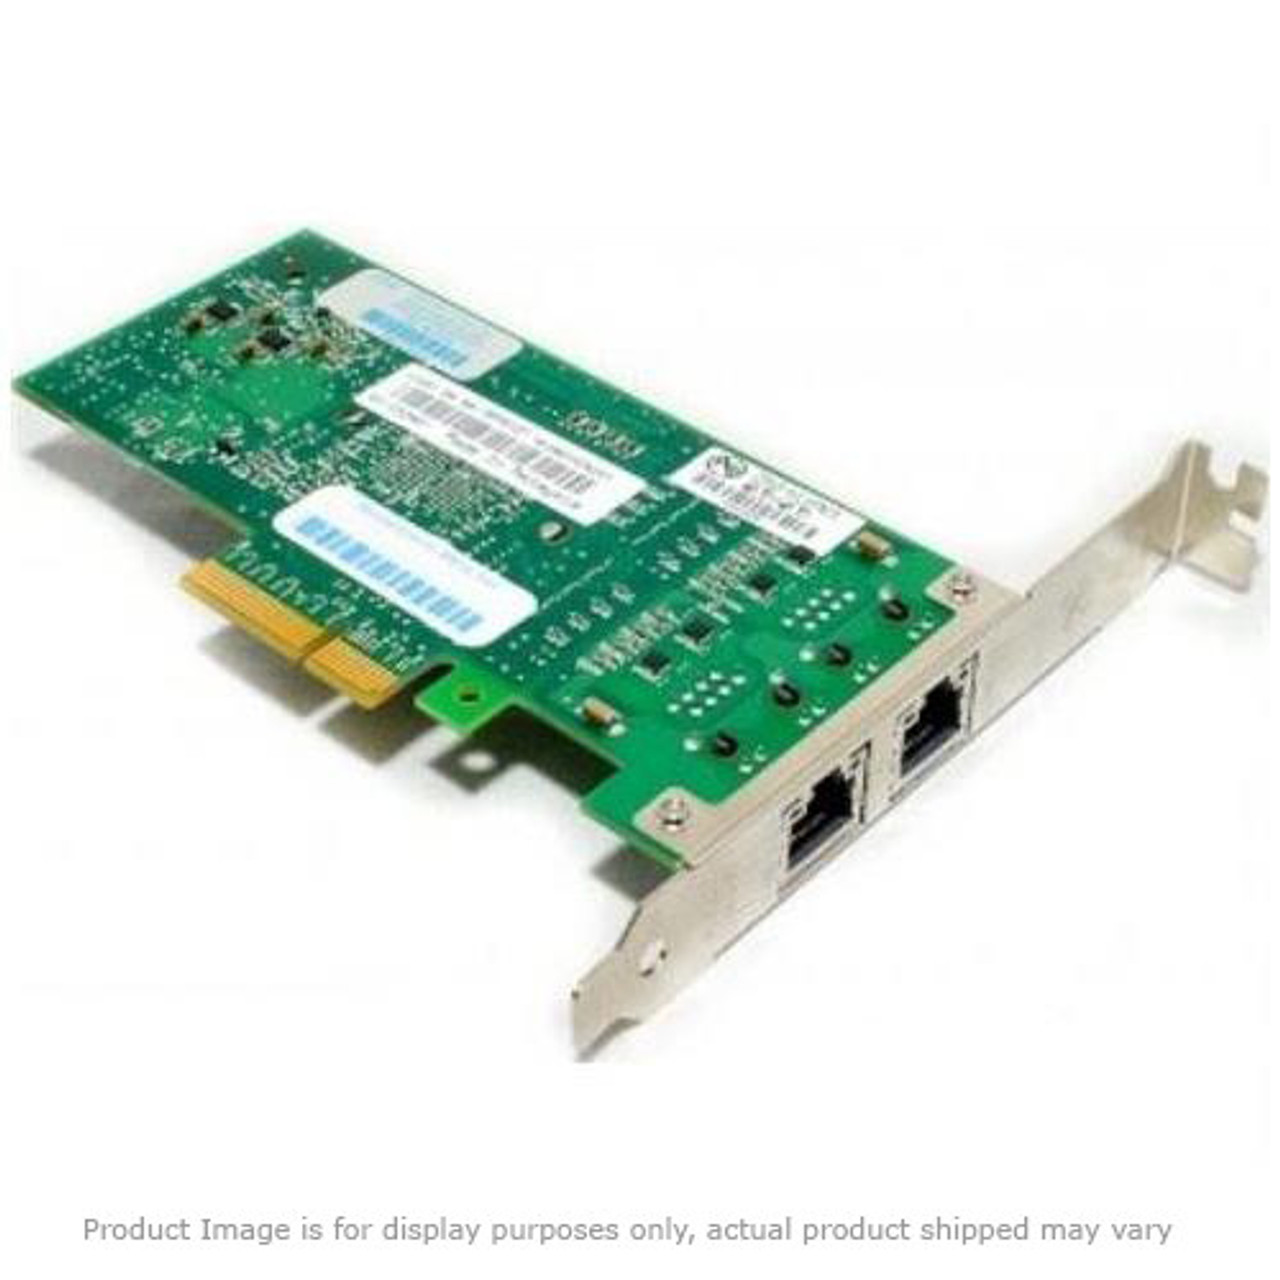 622-7663-001 Alcatel-Lucent Lbo Network Adapter Card (Refurbished)